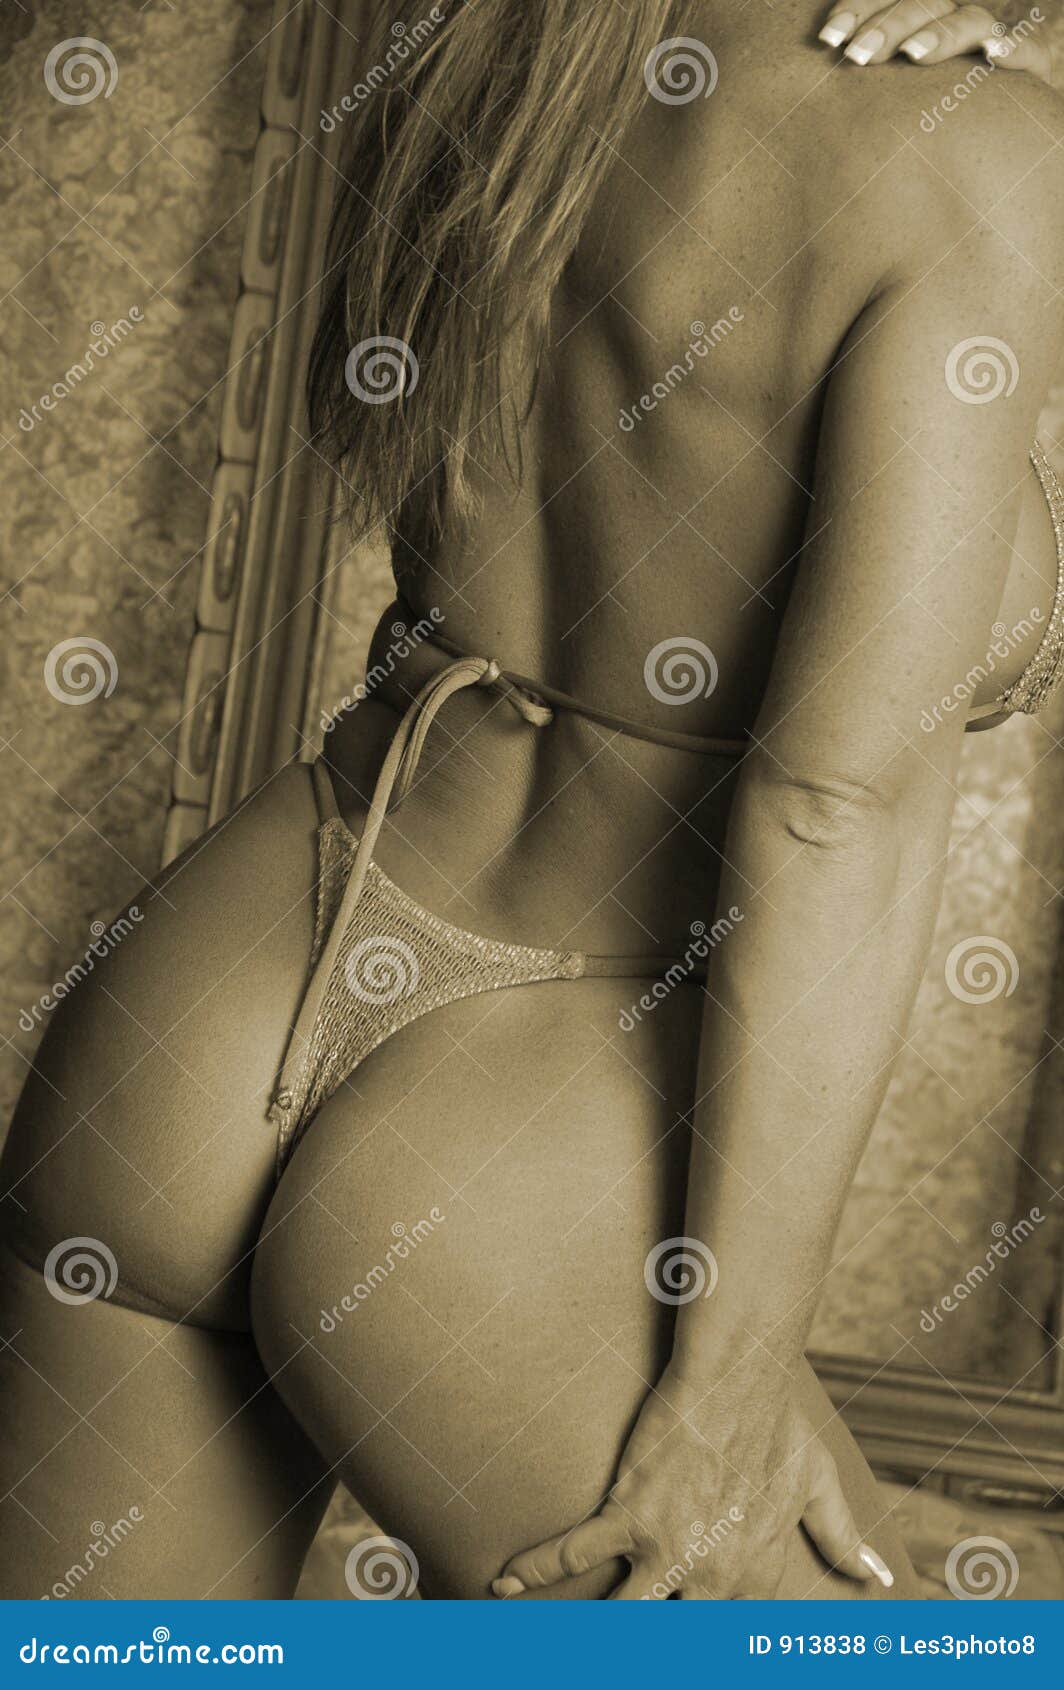 Hot girls in ag string G String Stock Photo Image Of Suit Woman Human Body 913838